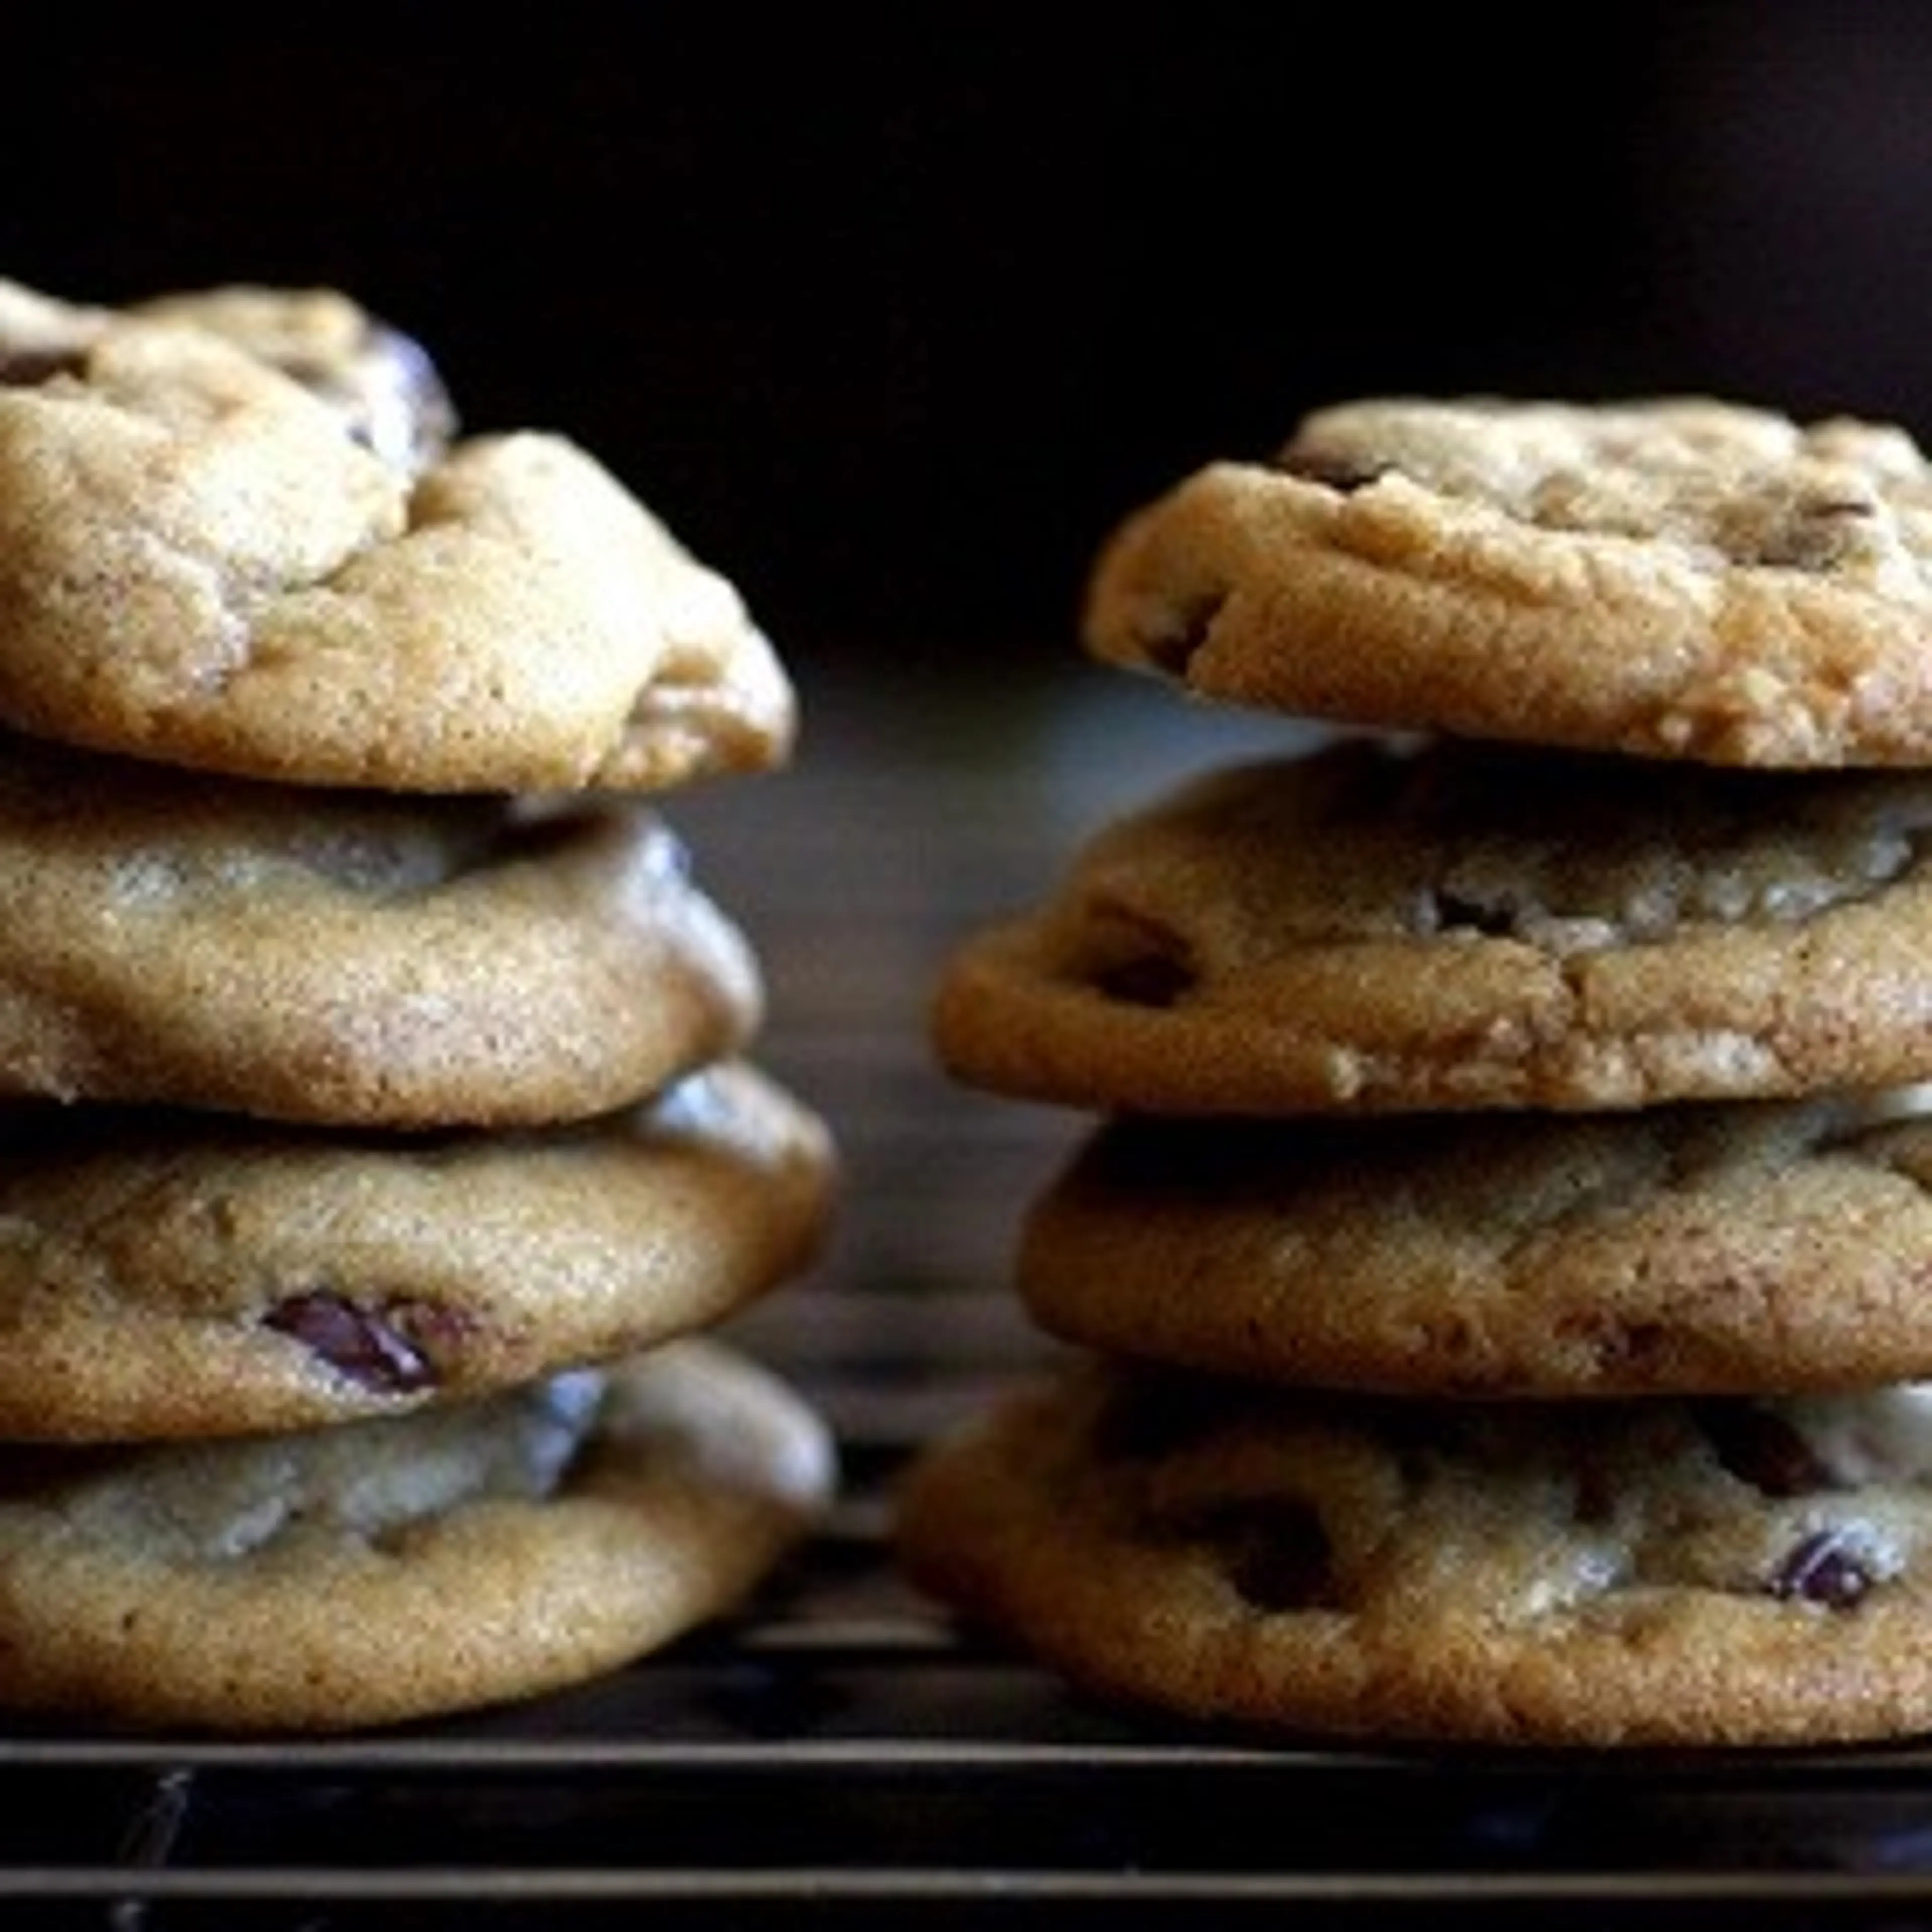 Crispy, Chewy Chocolate Chip Cookies